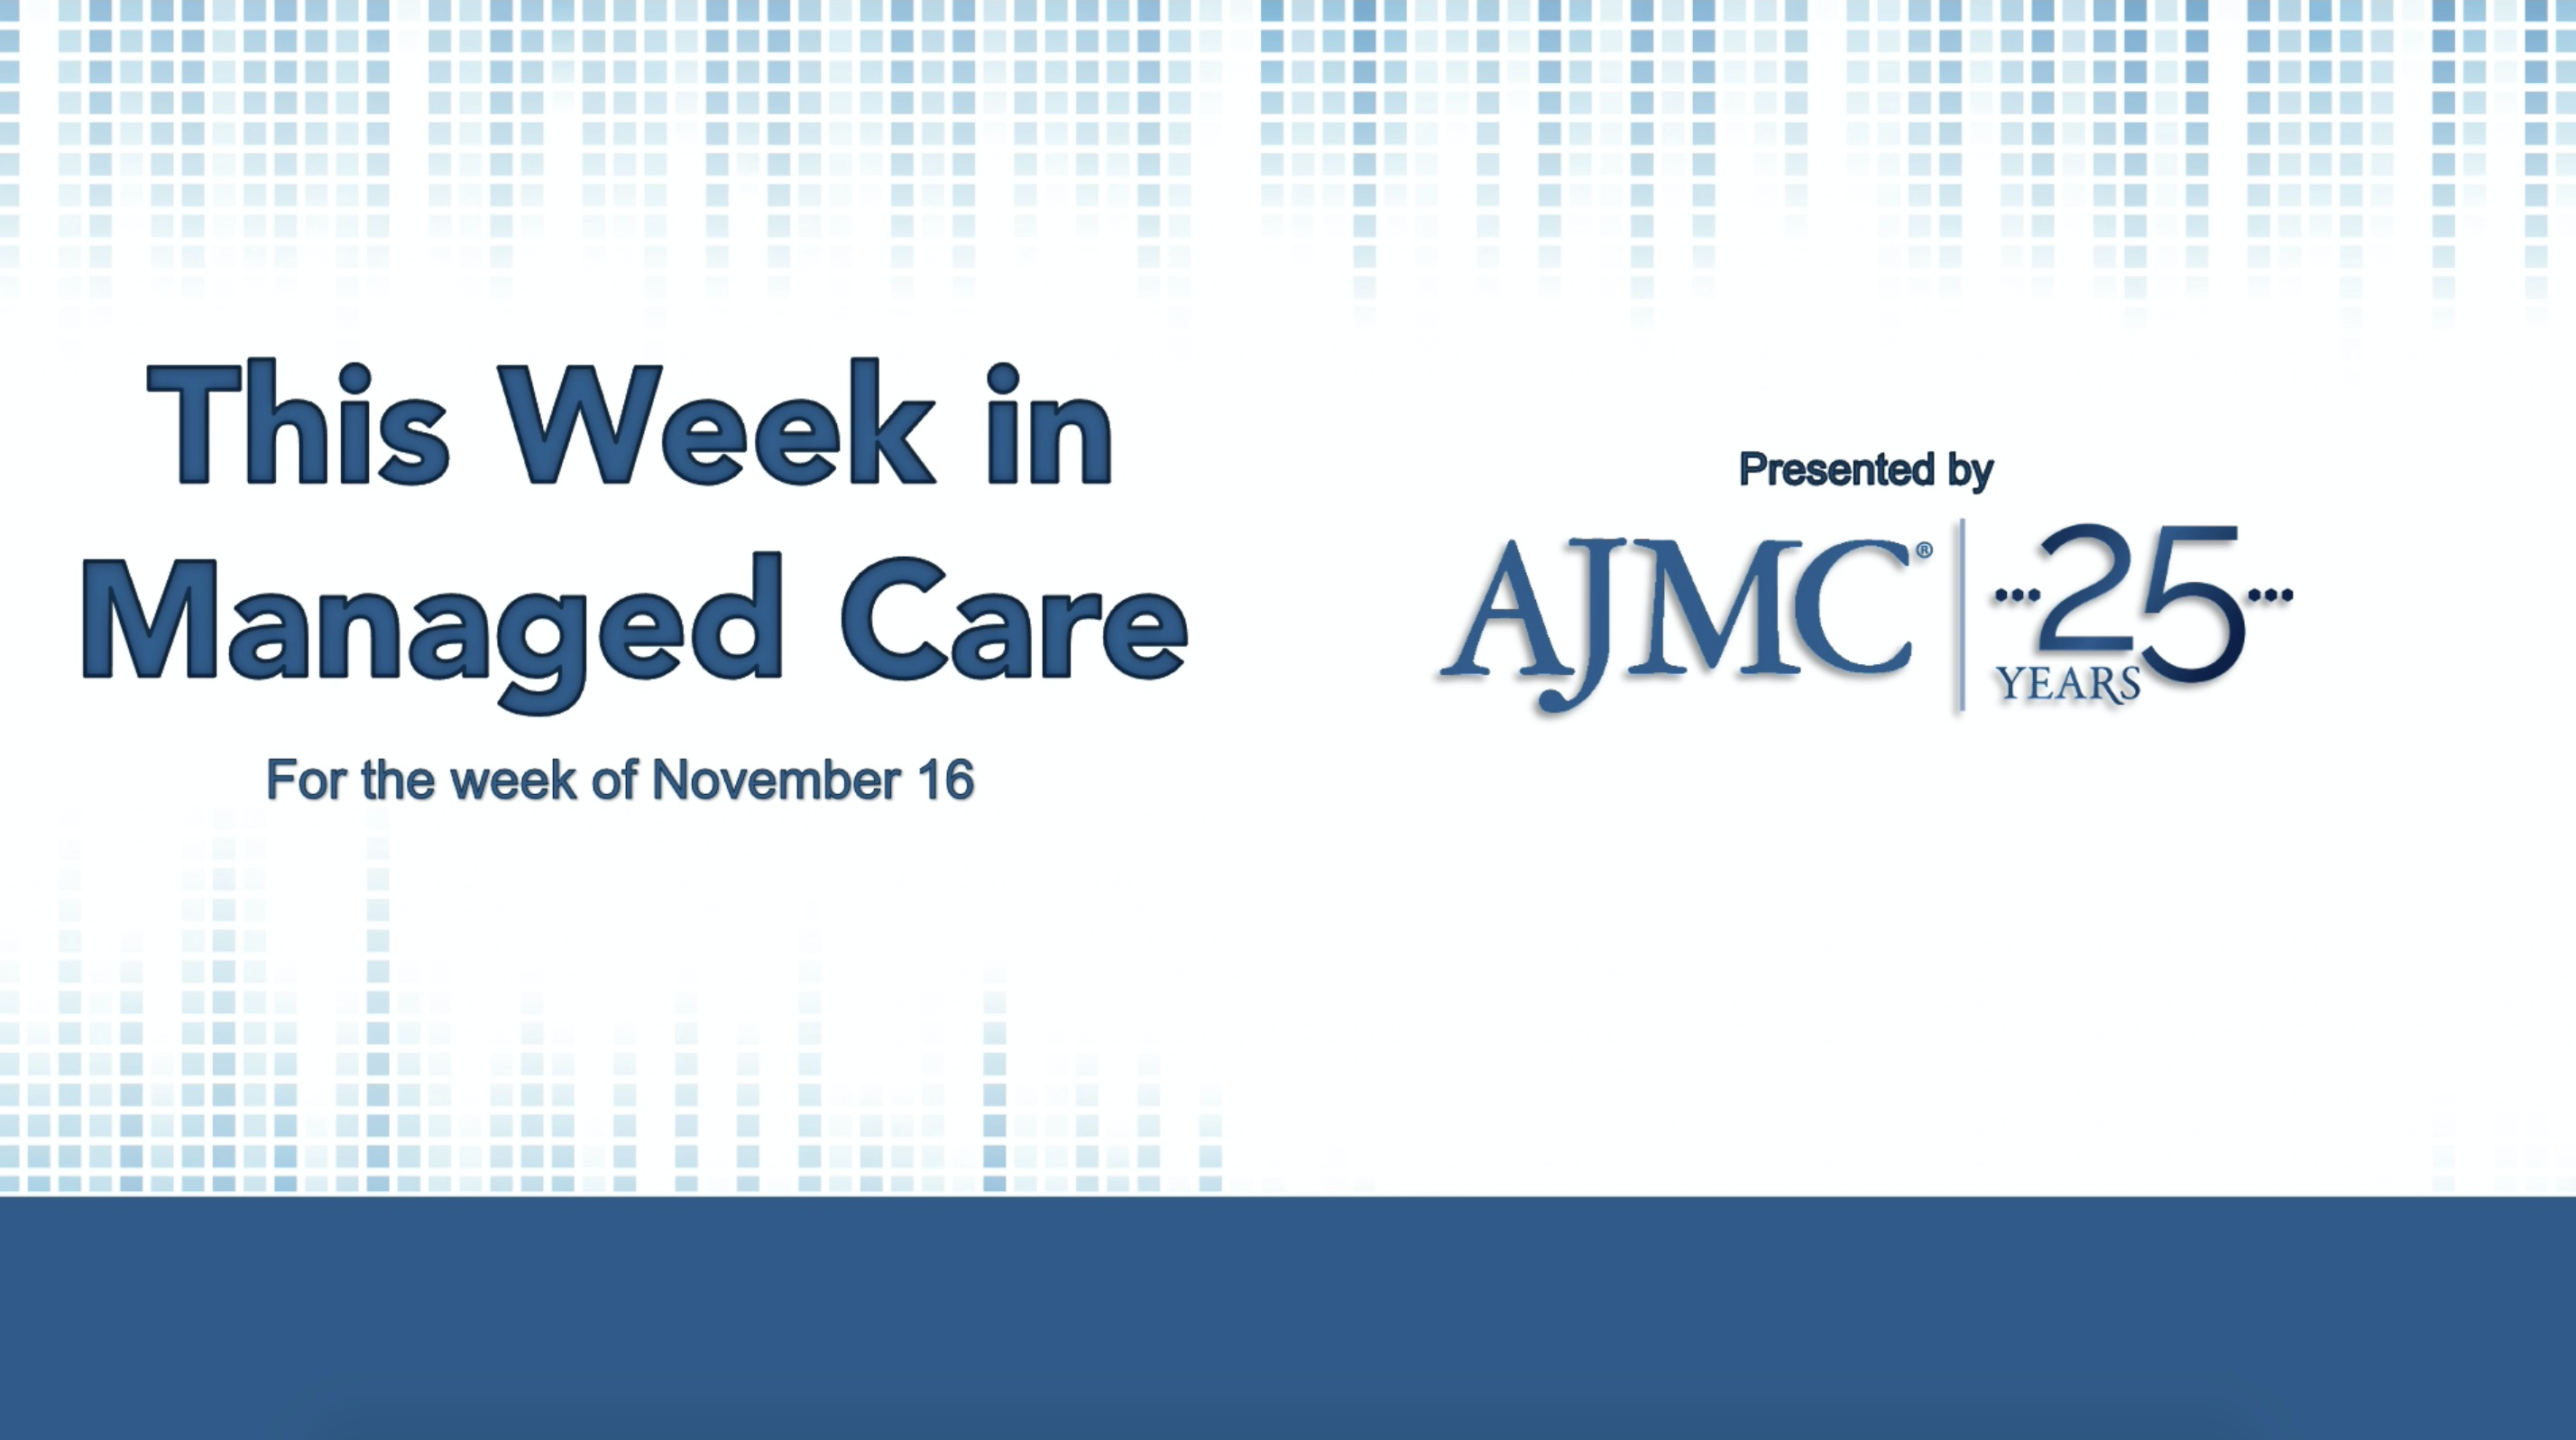 This Week in Managed Care: November 20, 2020